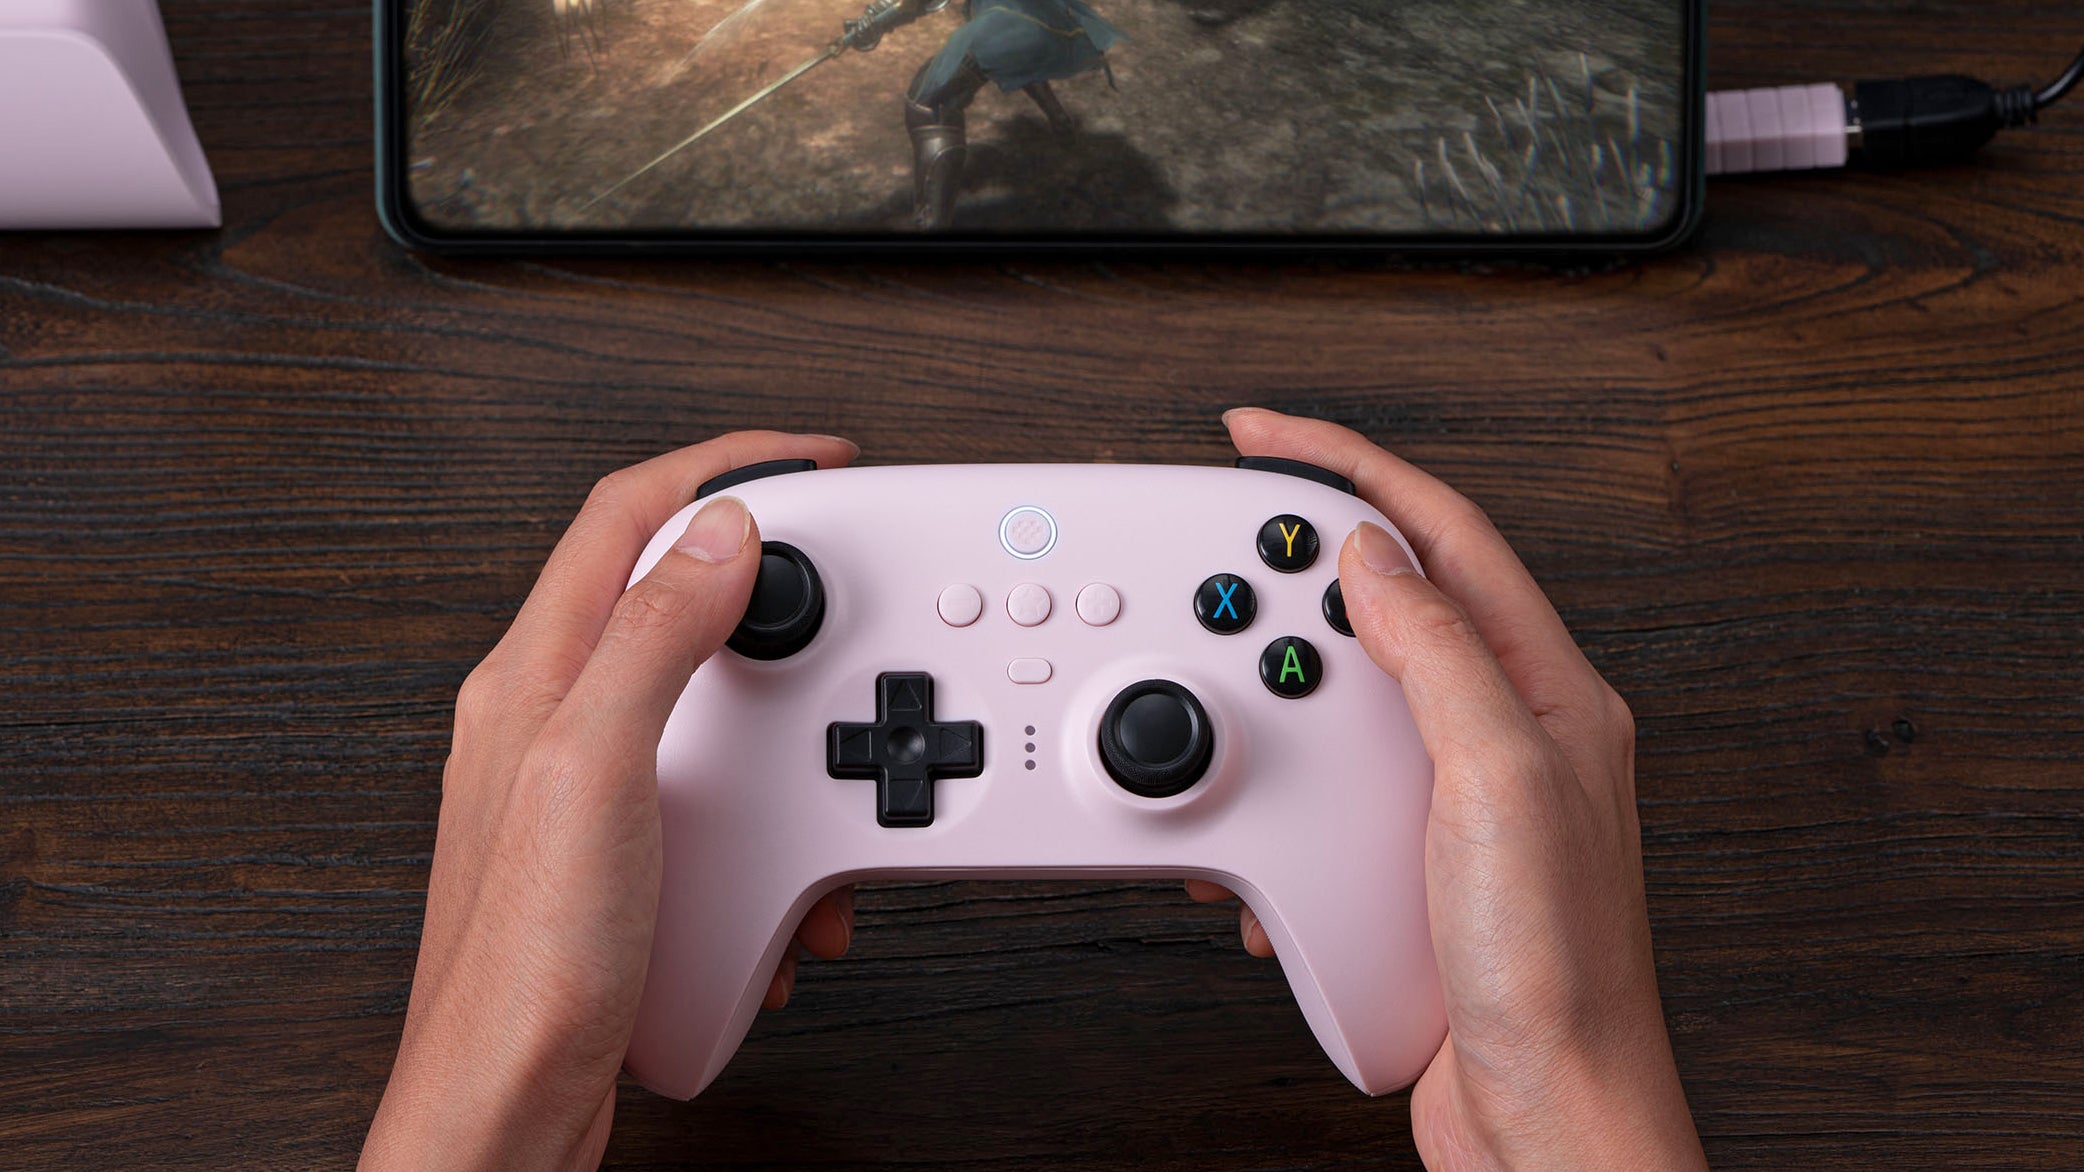 8BitDo’s Xbox-Style Ultimate Controller Goes Wireless, But Not For the Xbox